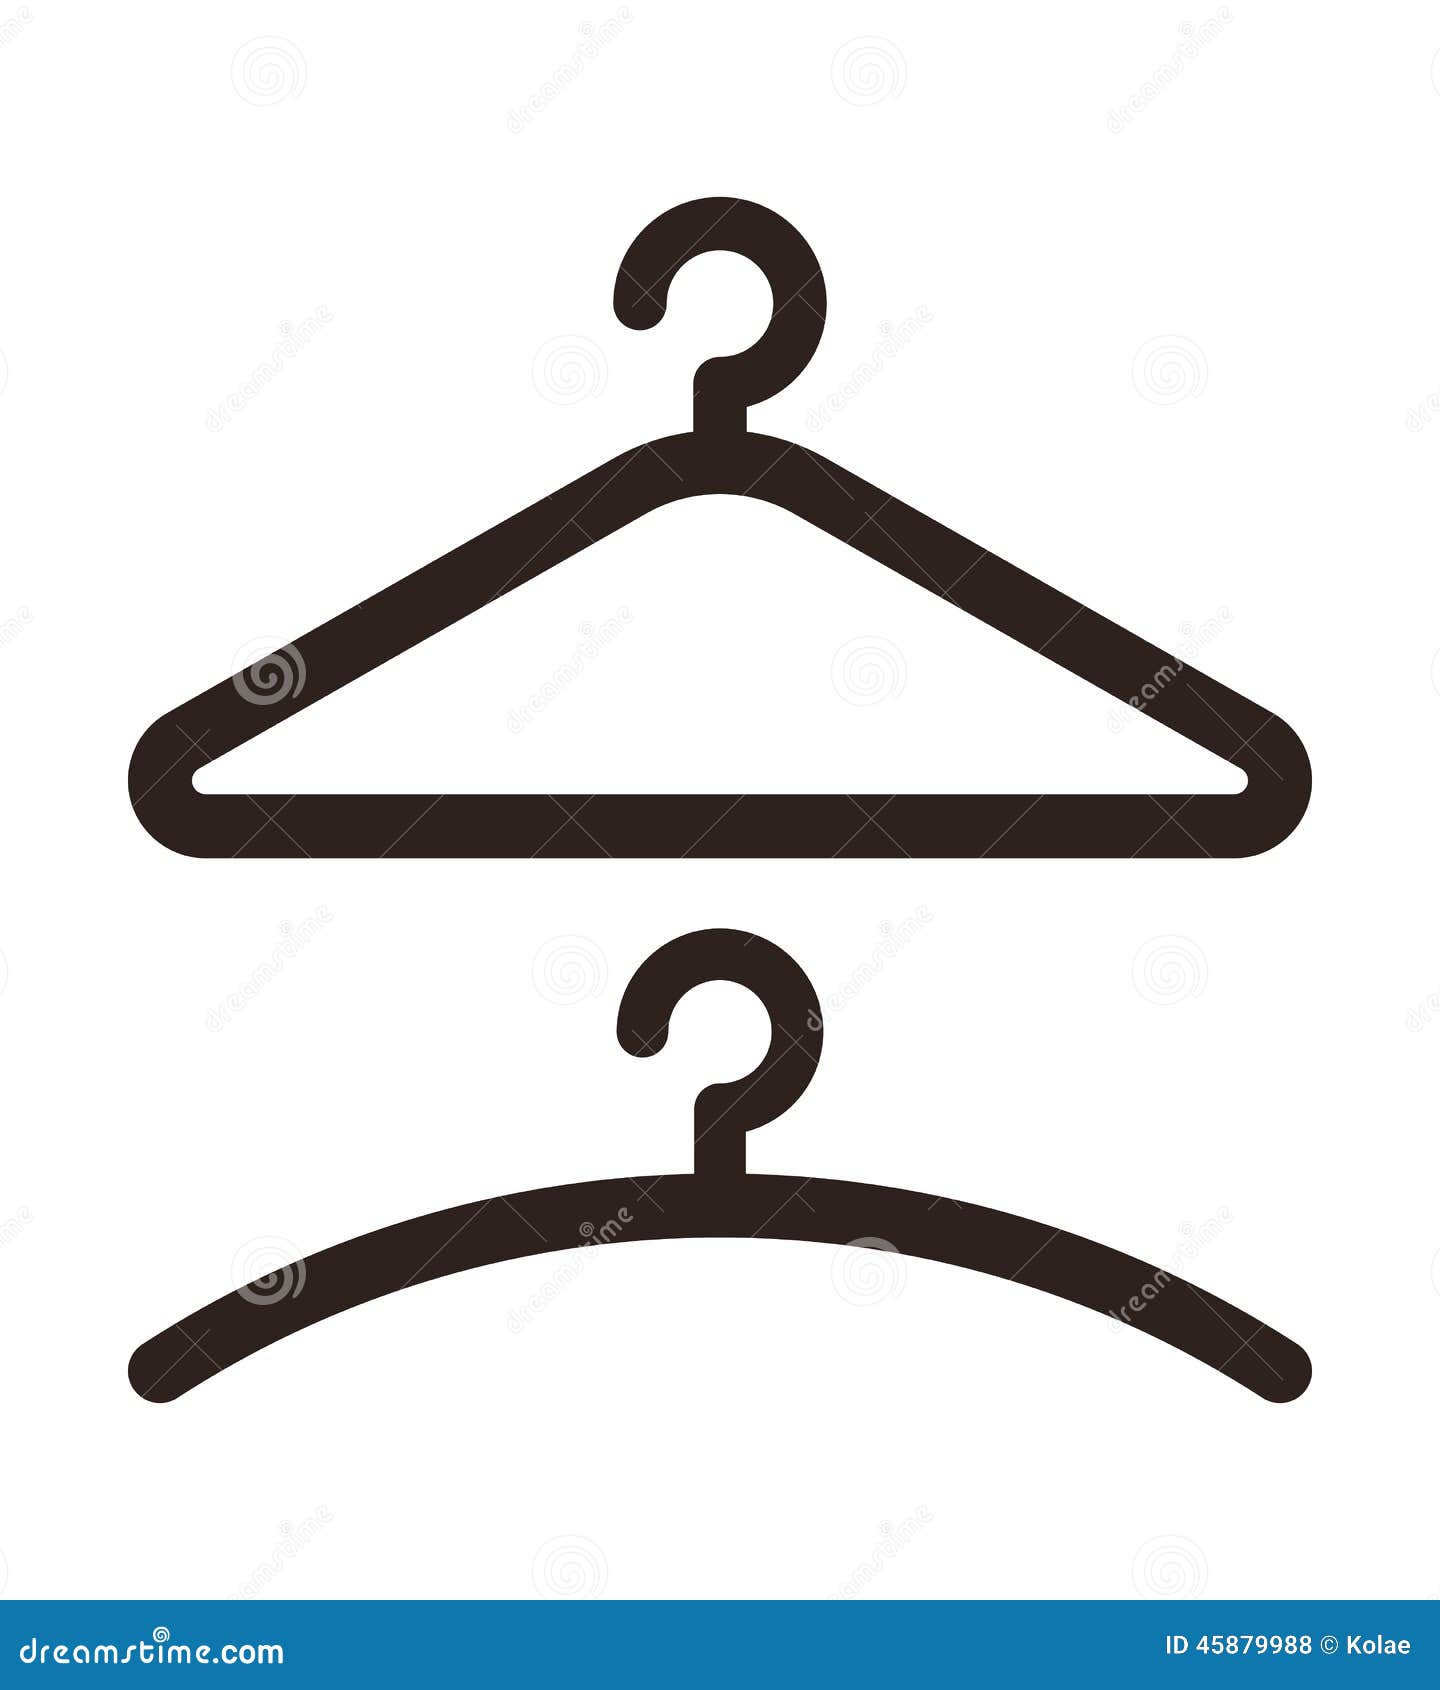 Hanger icon stock vector. Illustration of hanger, clothes - 45879988